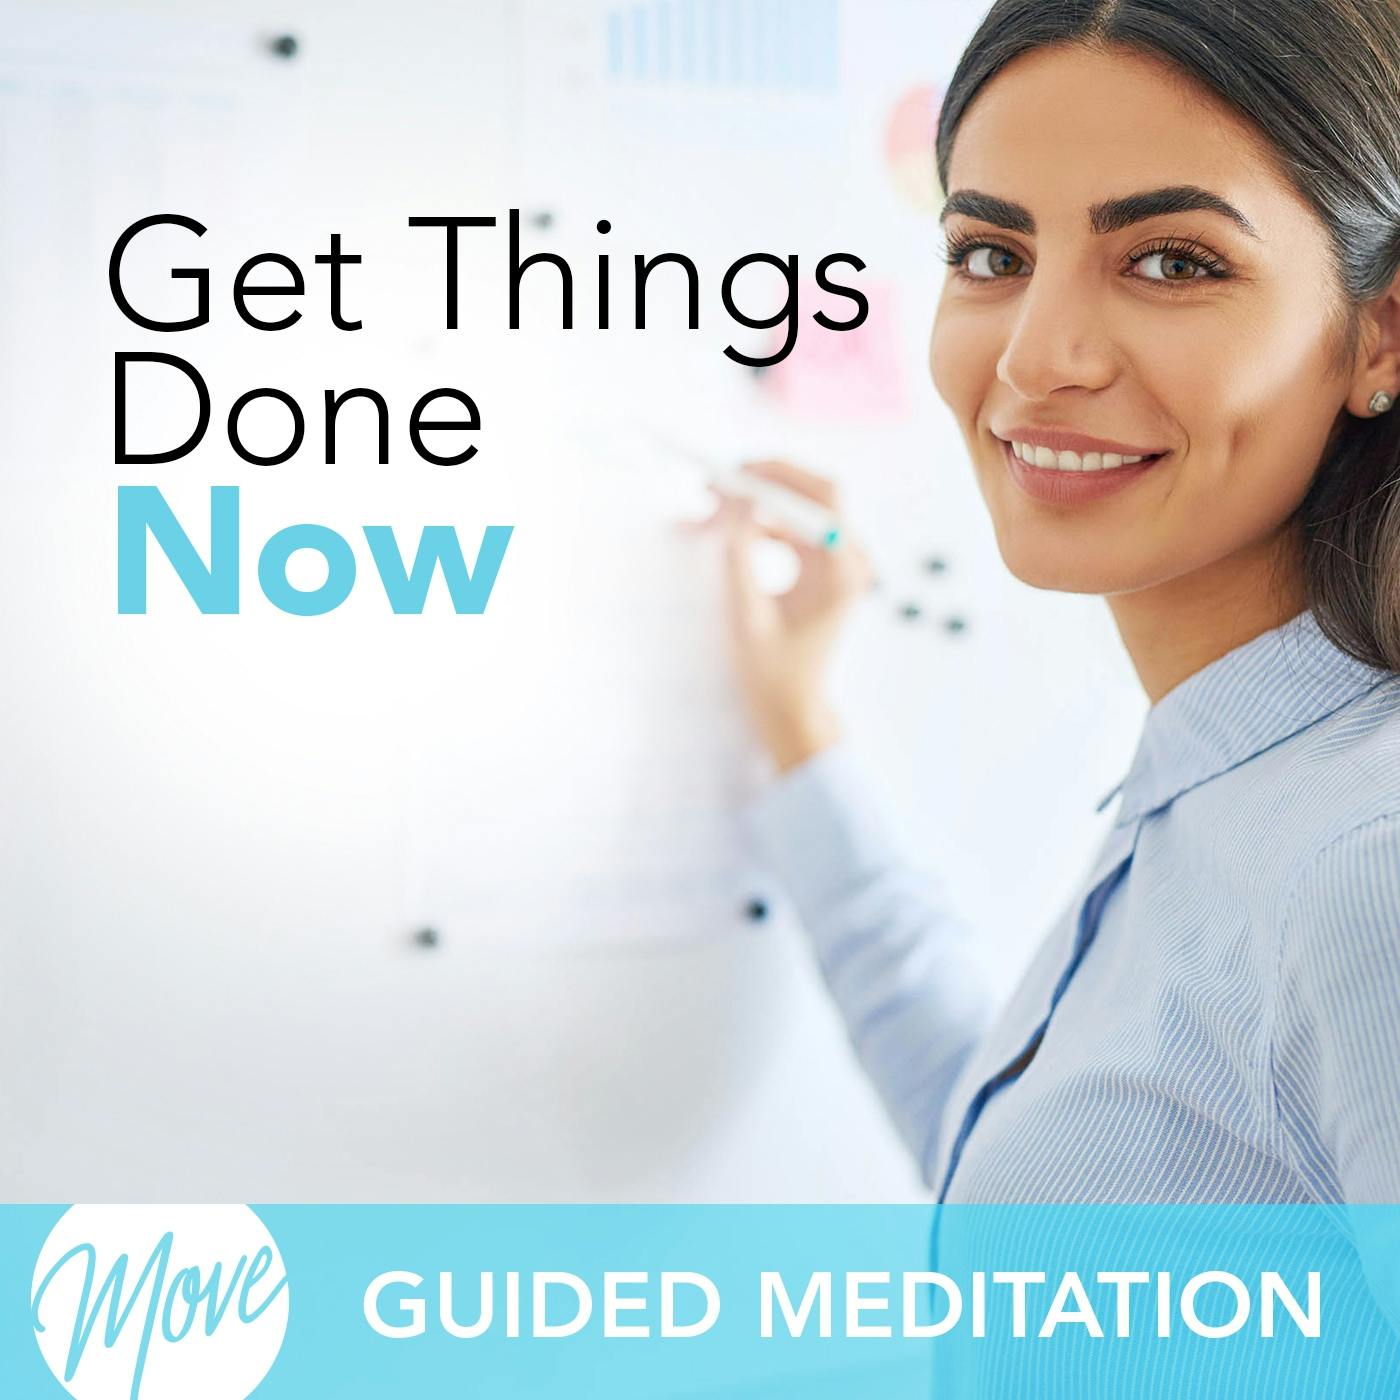 Get Things Done Now! - Amy Applebaum